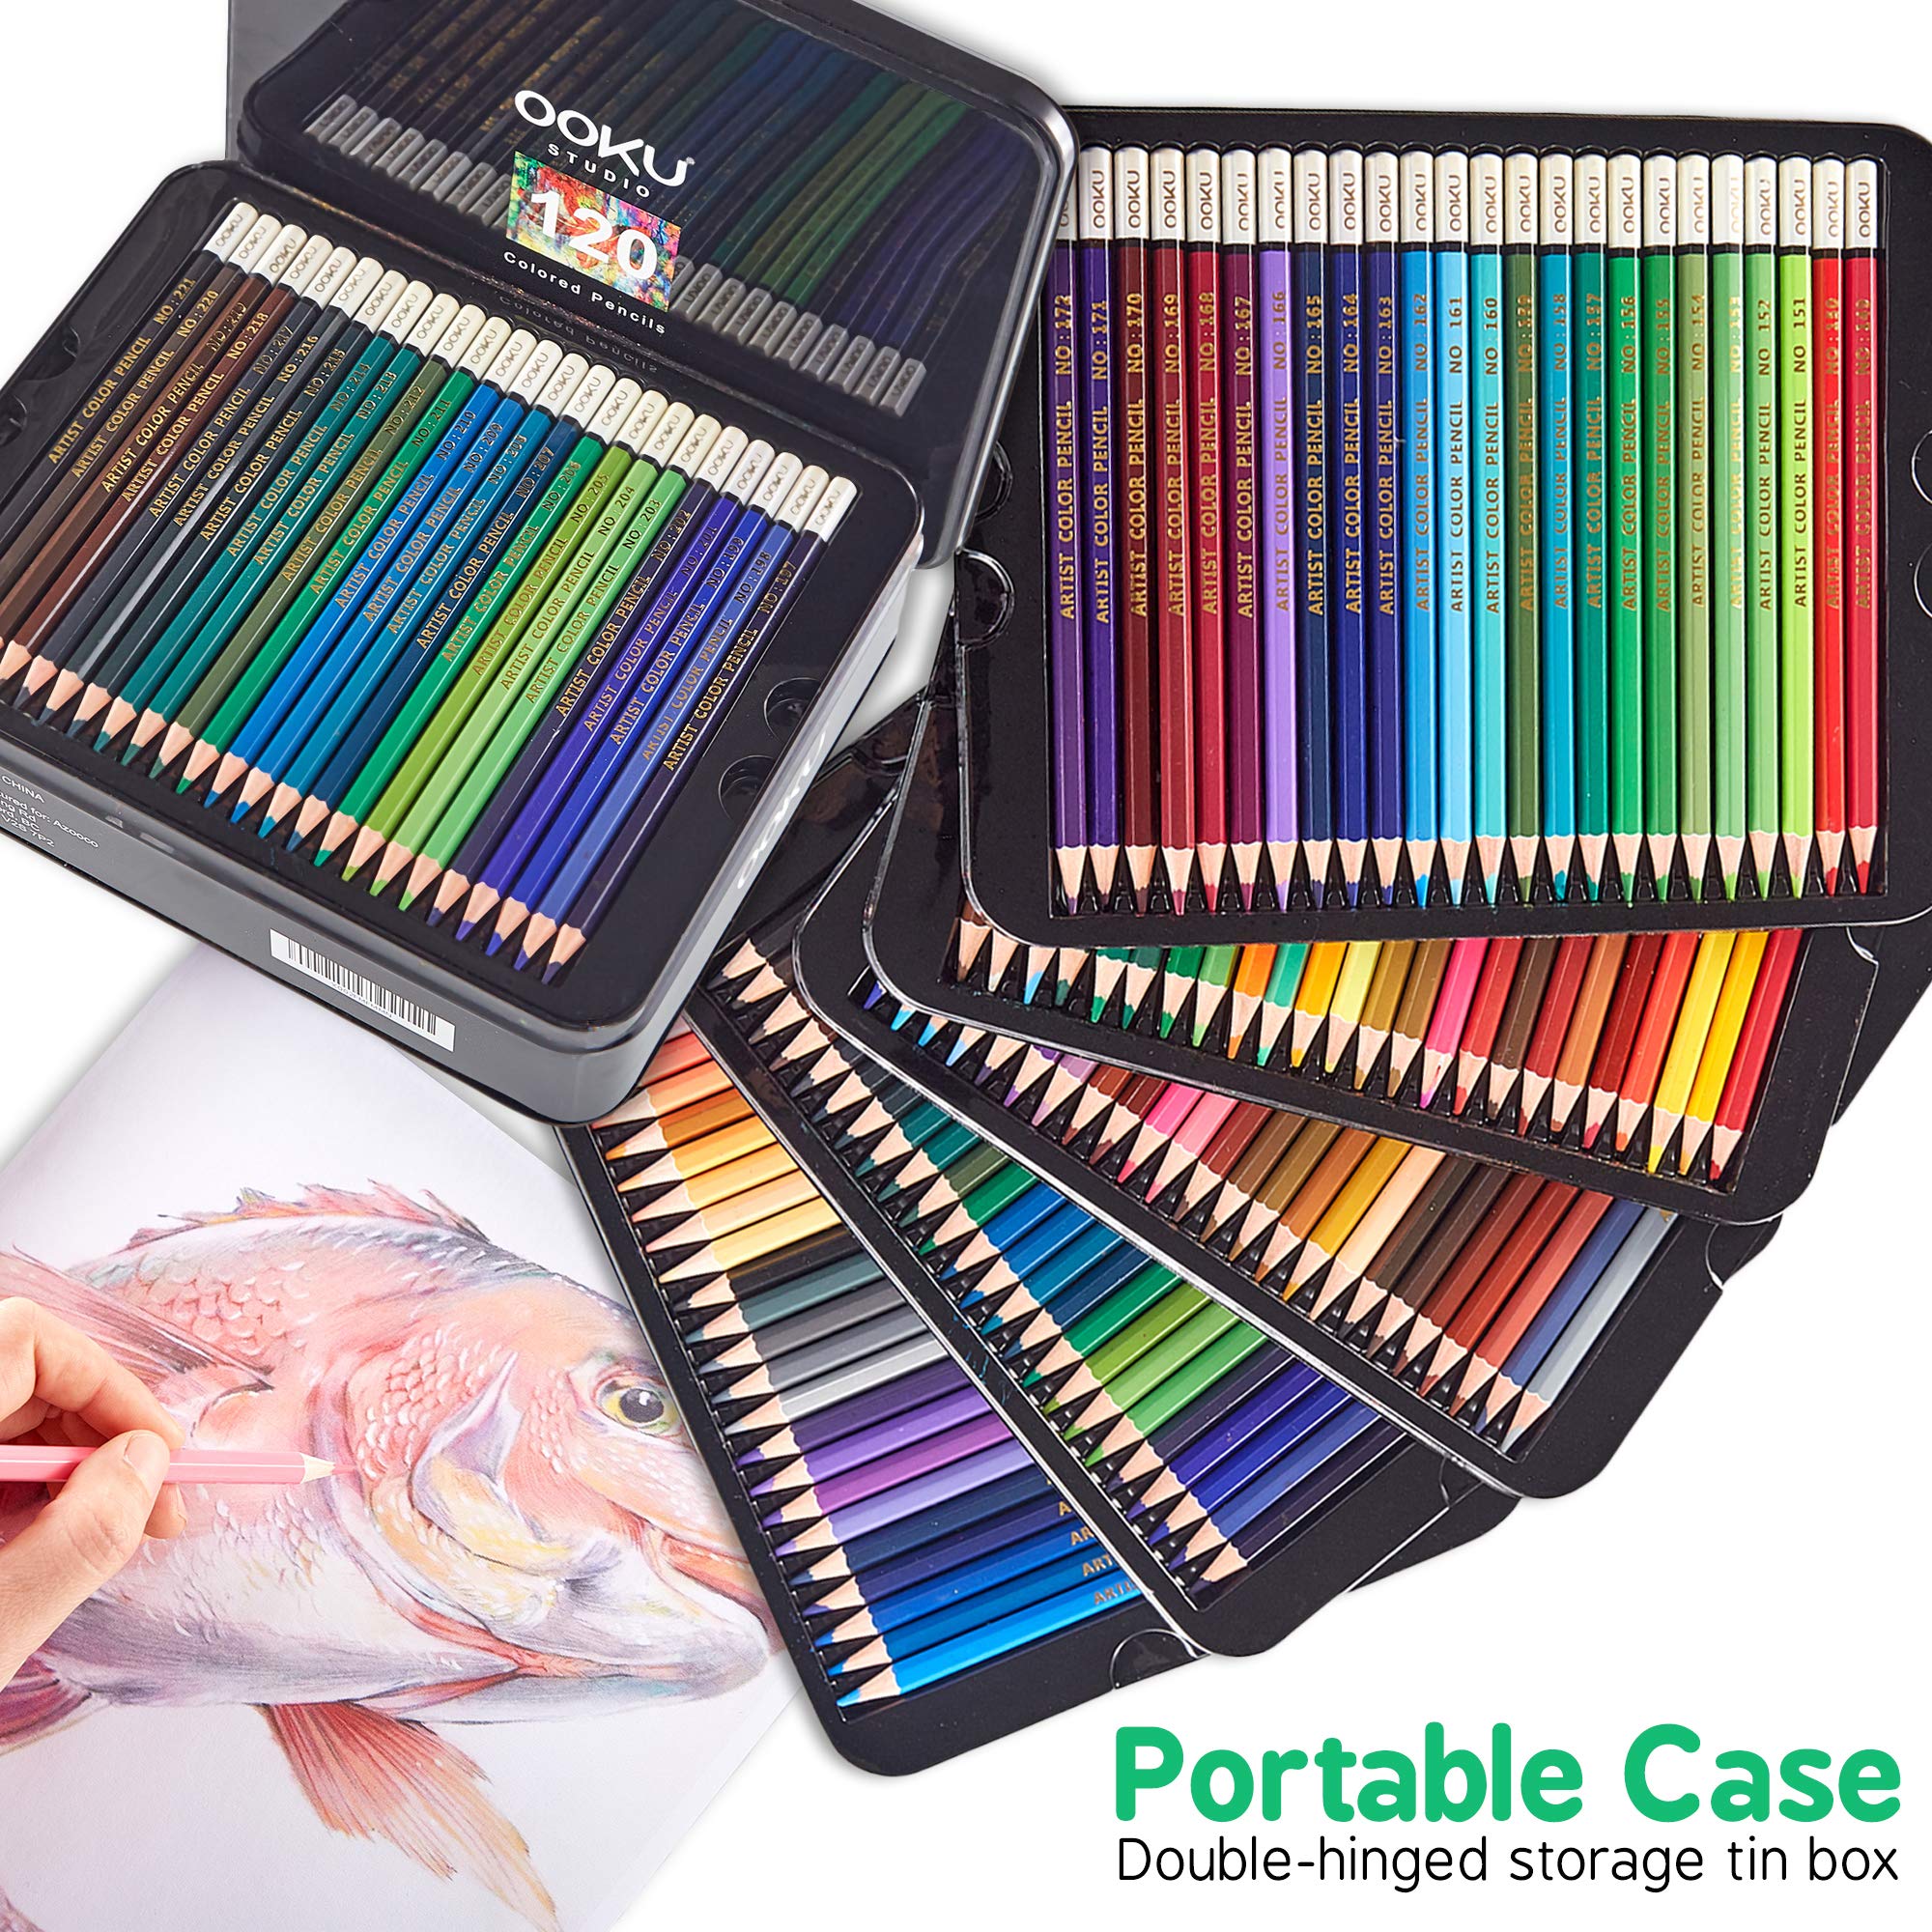 Art Supplies 120-Color Colored Pencils Set for Adults Coloring Books with  Sketchbook, Professional Vibrant Artists Pencil for Drawing Sketching  Blending Shading, Quality Soft Core Oil Based 